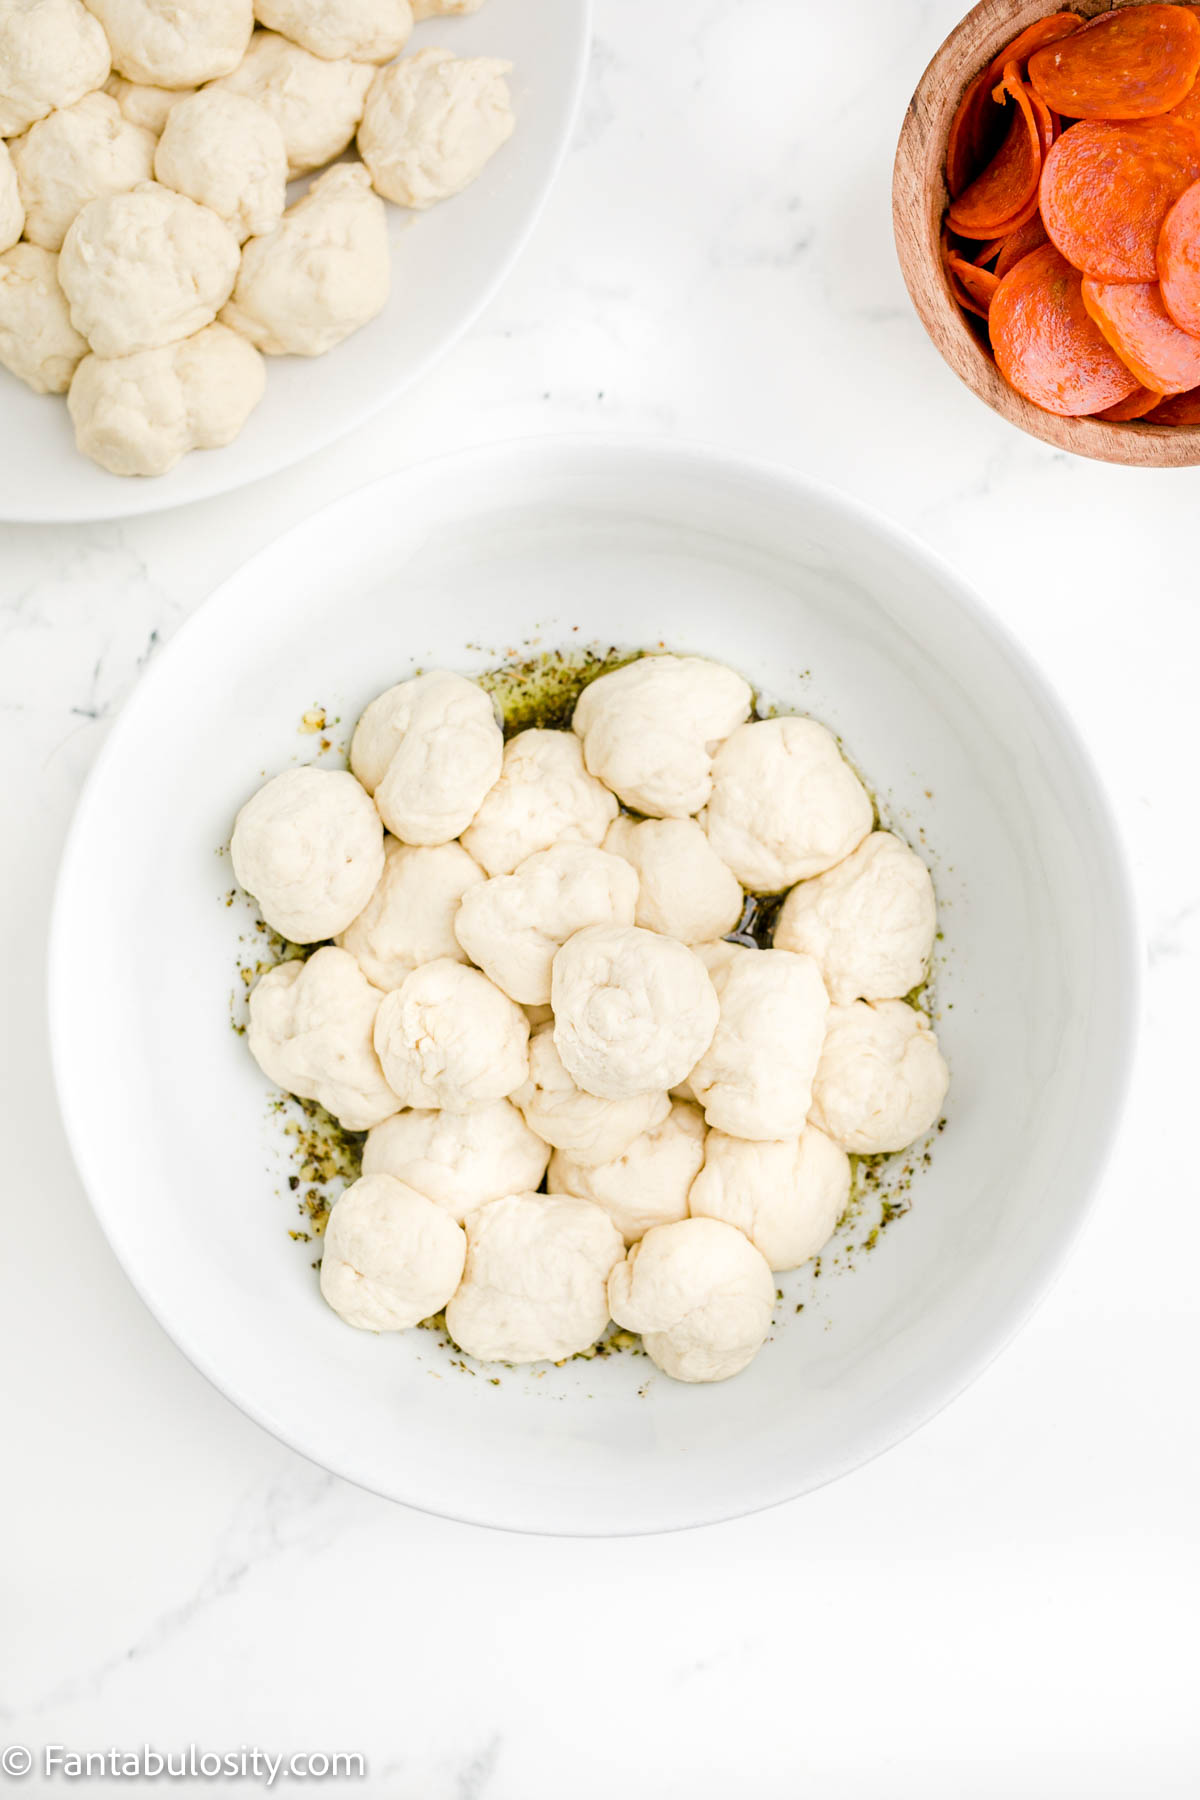 dough balls in bowl with oil and spices